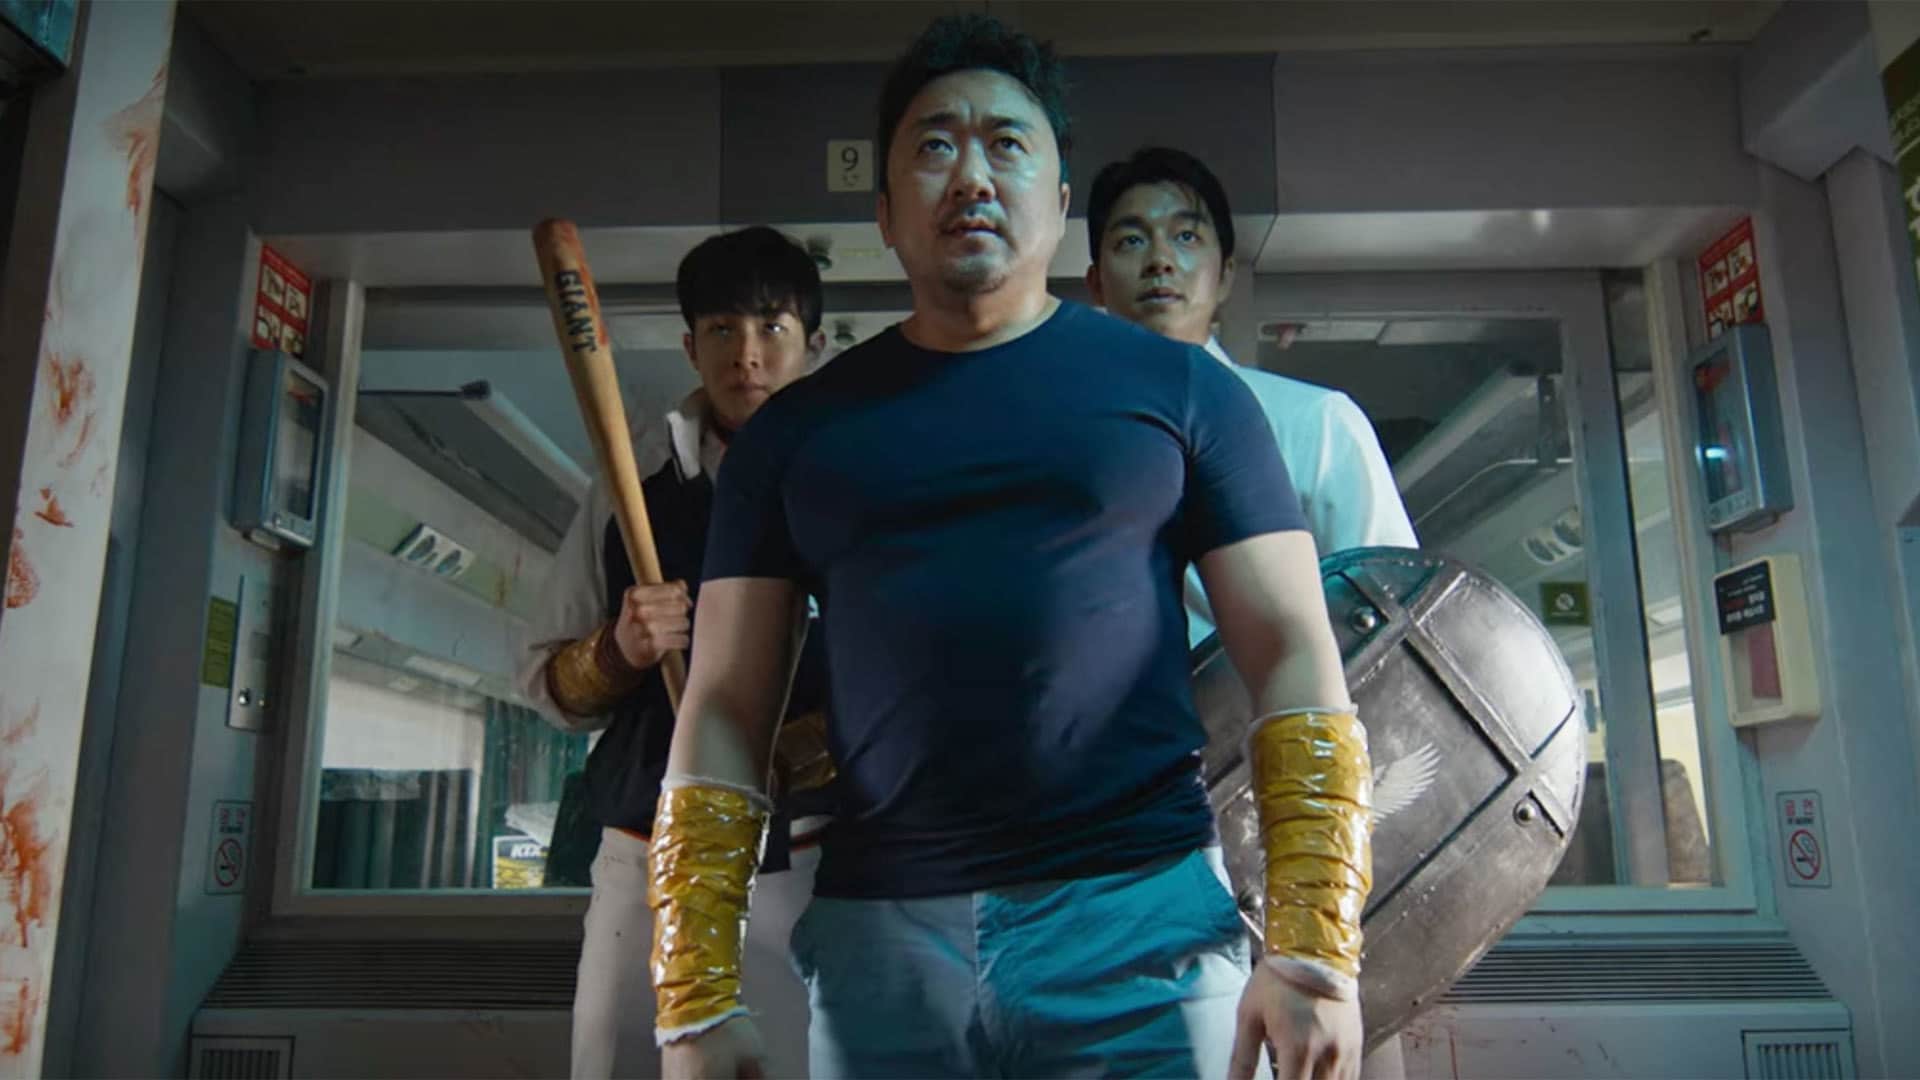 a scene from the film 'Train to Busan'